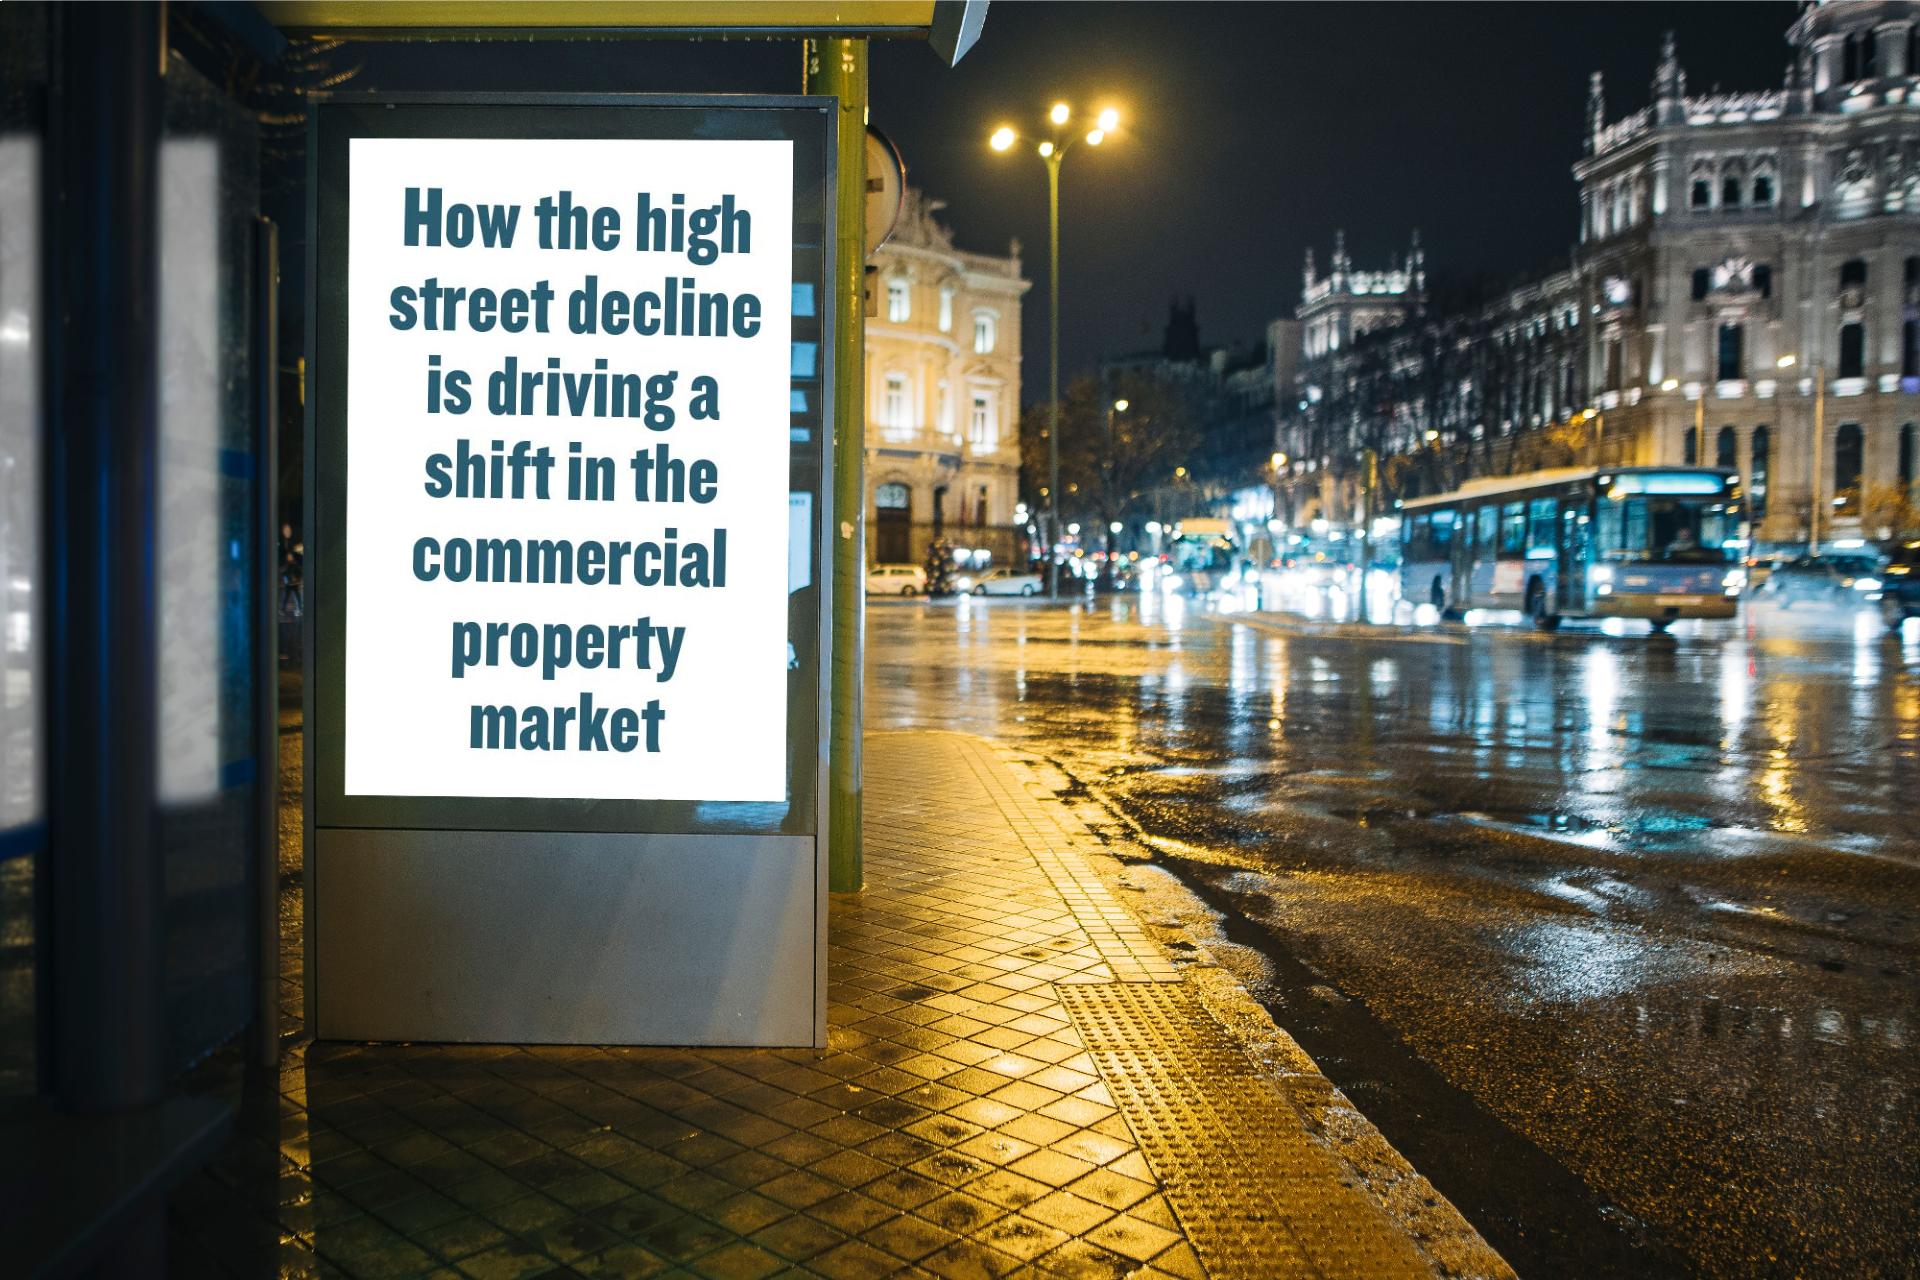 How the high street decline is driving a shift in the commercial property market